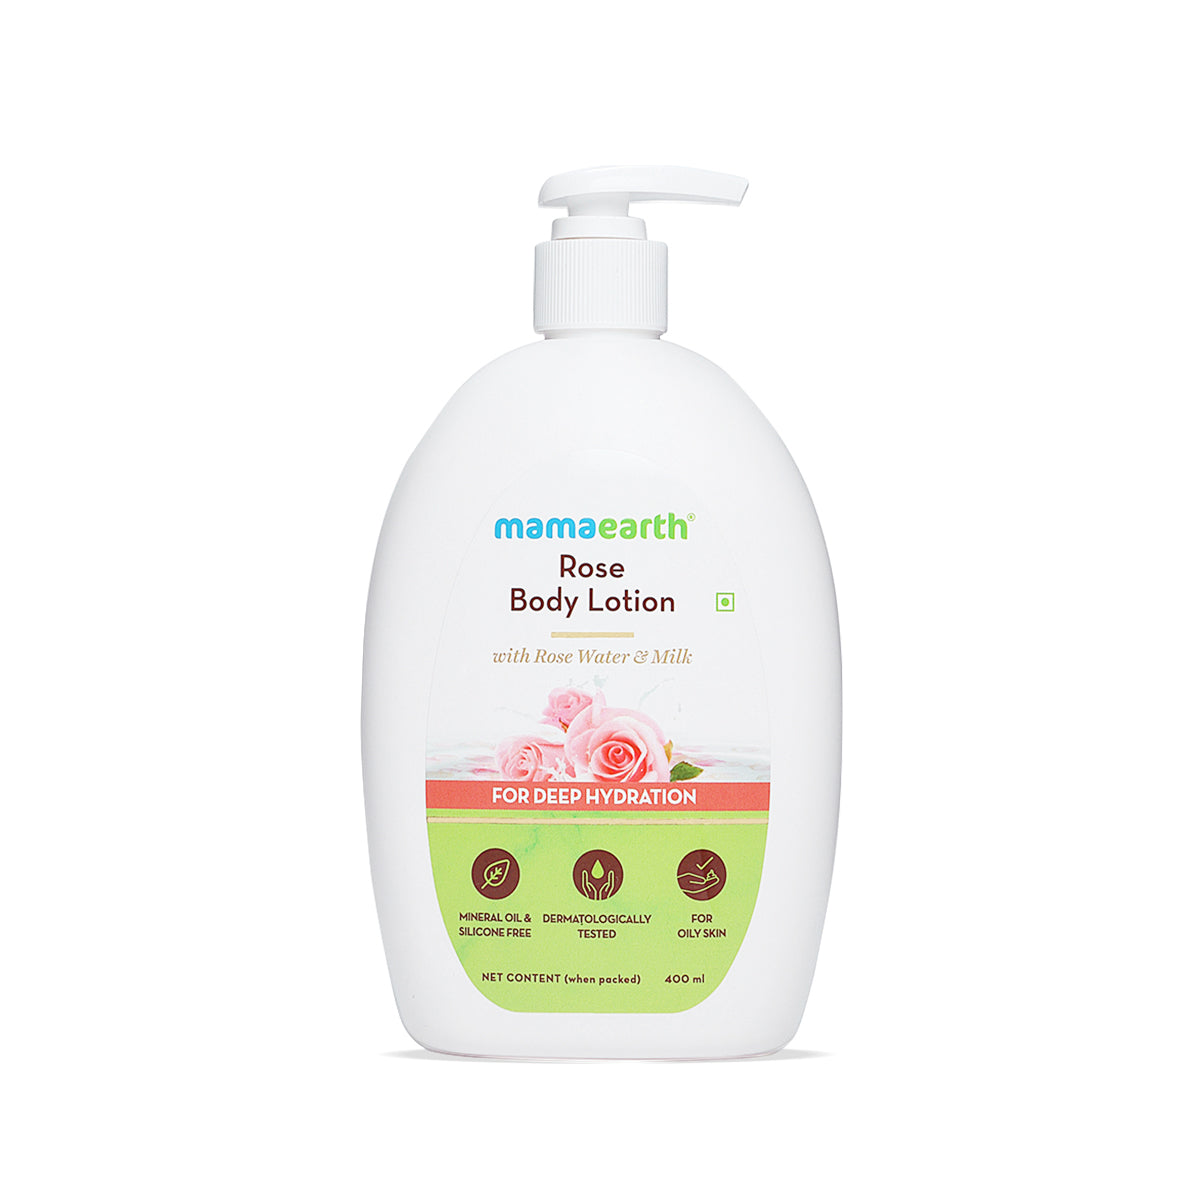 Rose Body Lotion with Rose Water and Milk For Deep Hydration | Intense Hydration | Non-Greasy | Softens Skin- 400 ml